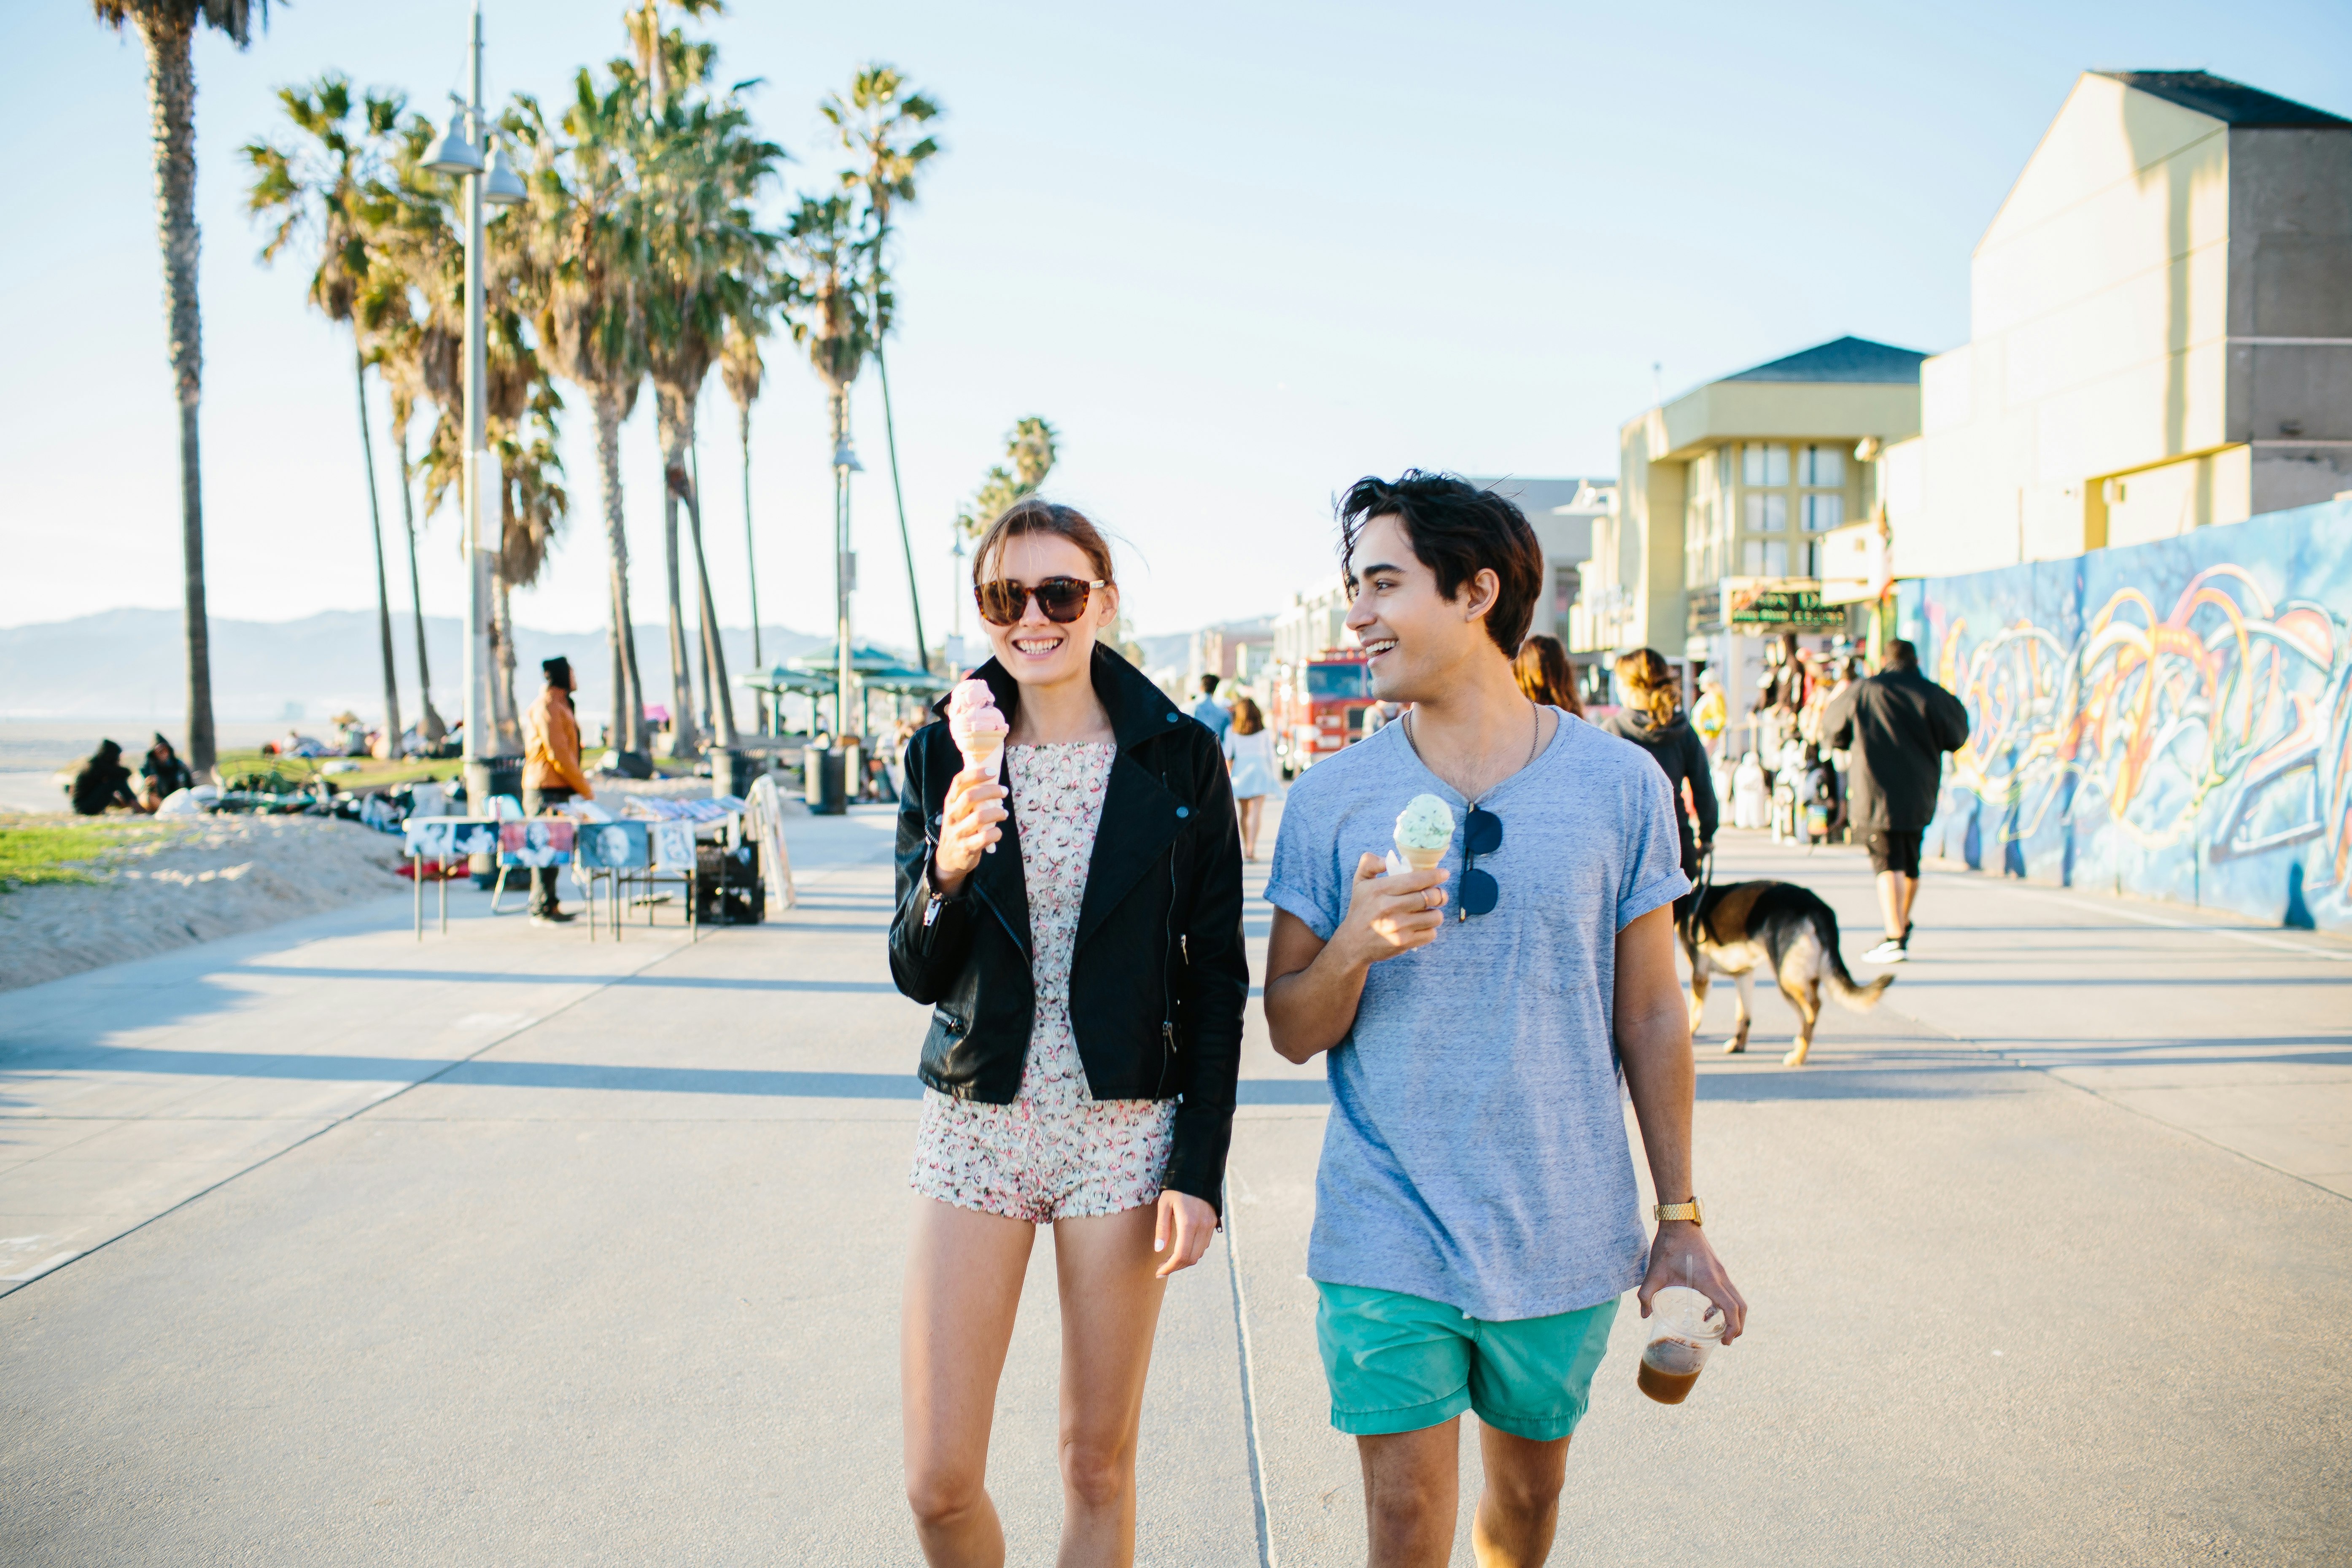 A young man and woman eat ice cream cones as they walk along the boardwalk in Venice Beach; California ice cream